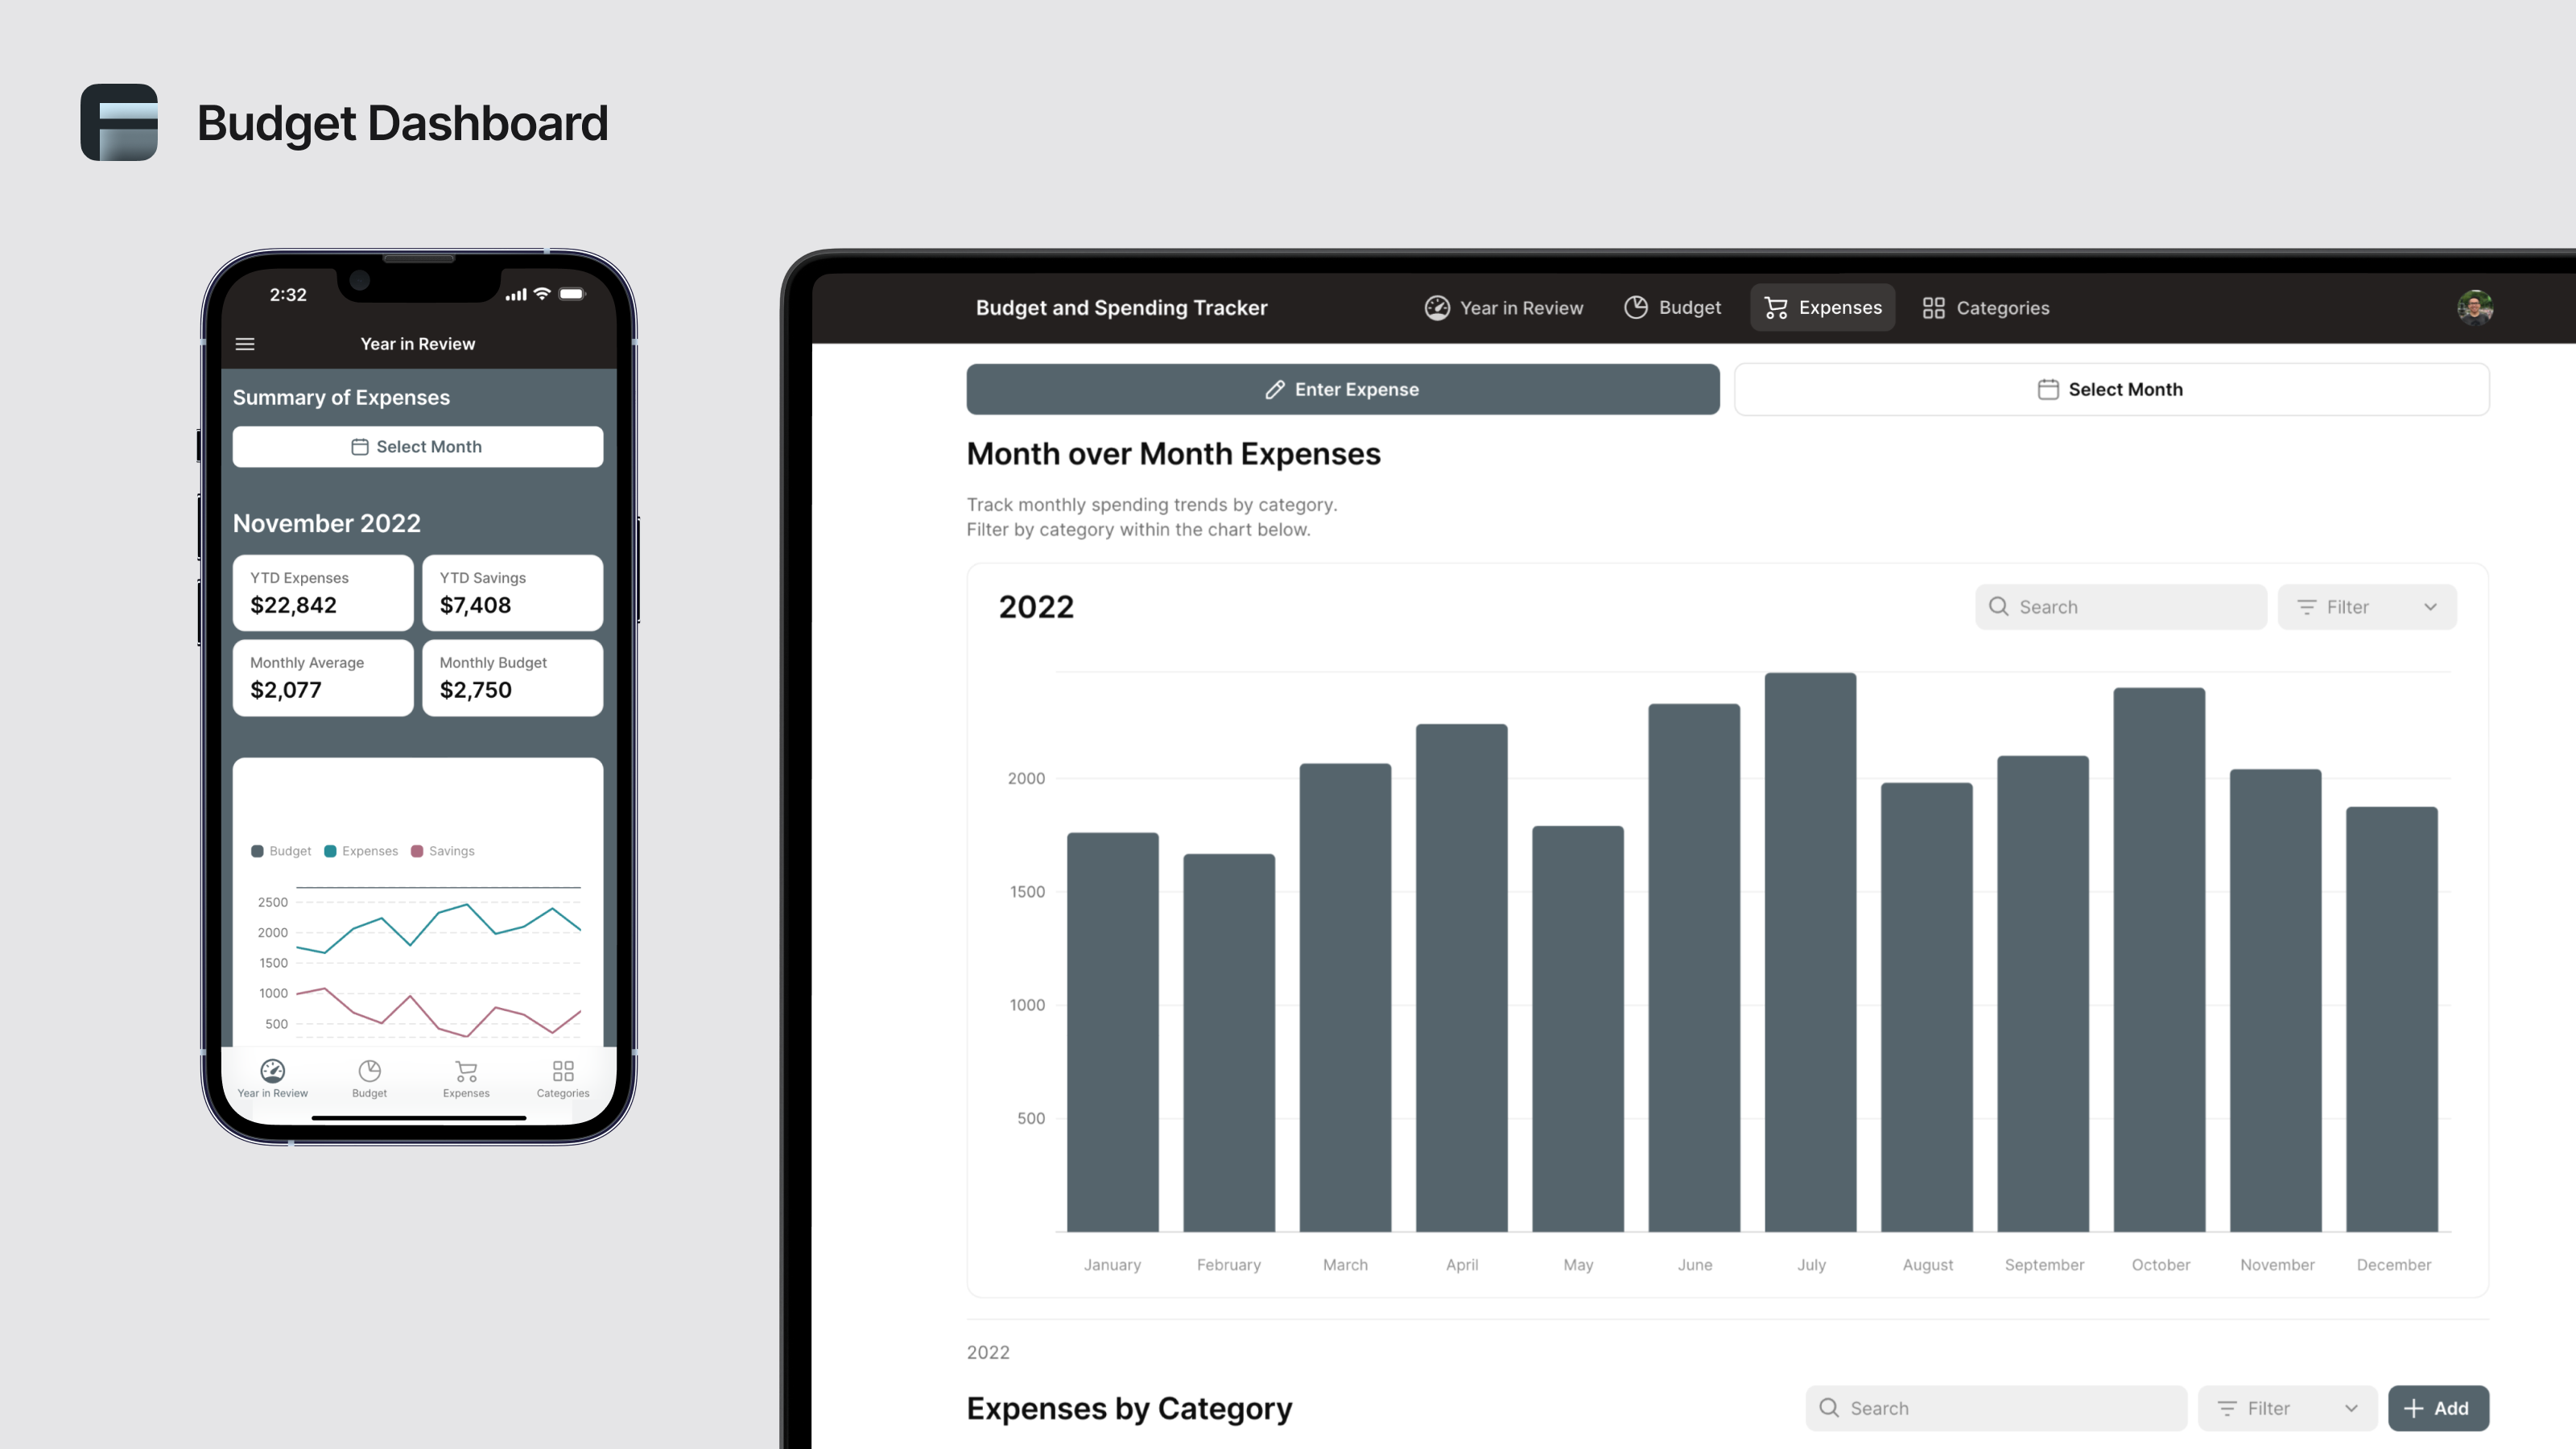 Build a Custom Budget Dashboard App for Your Business